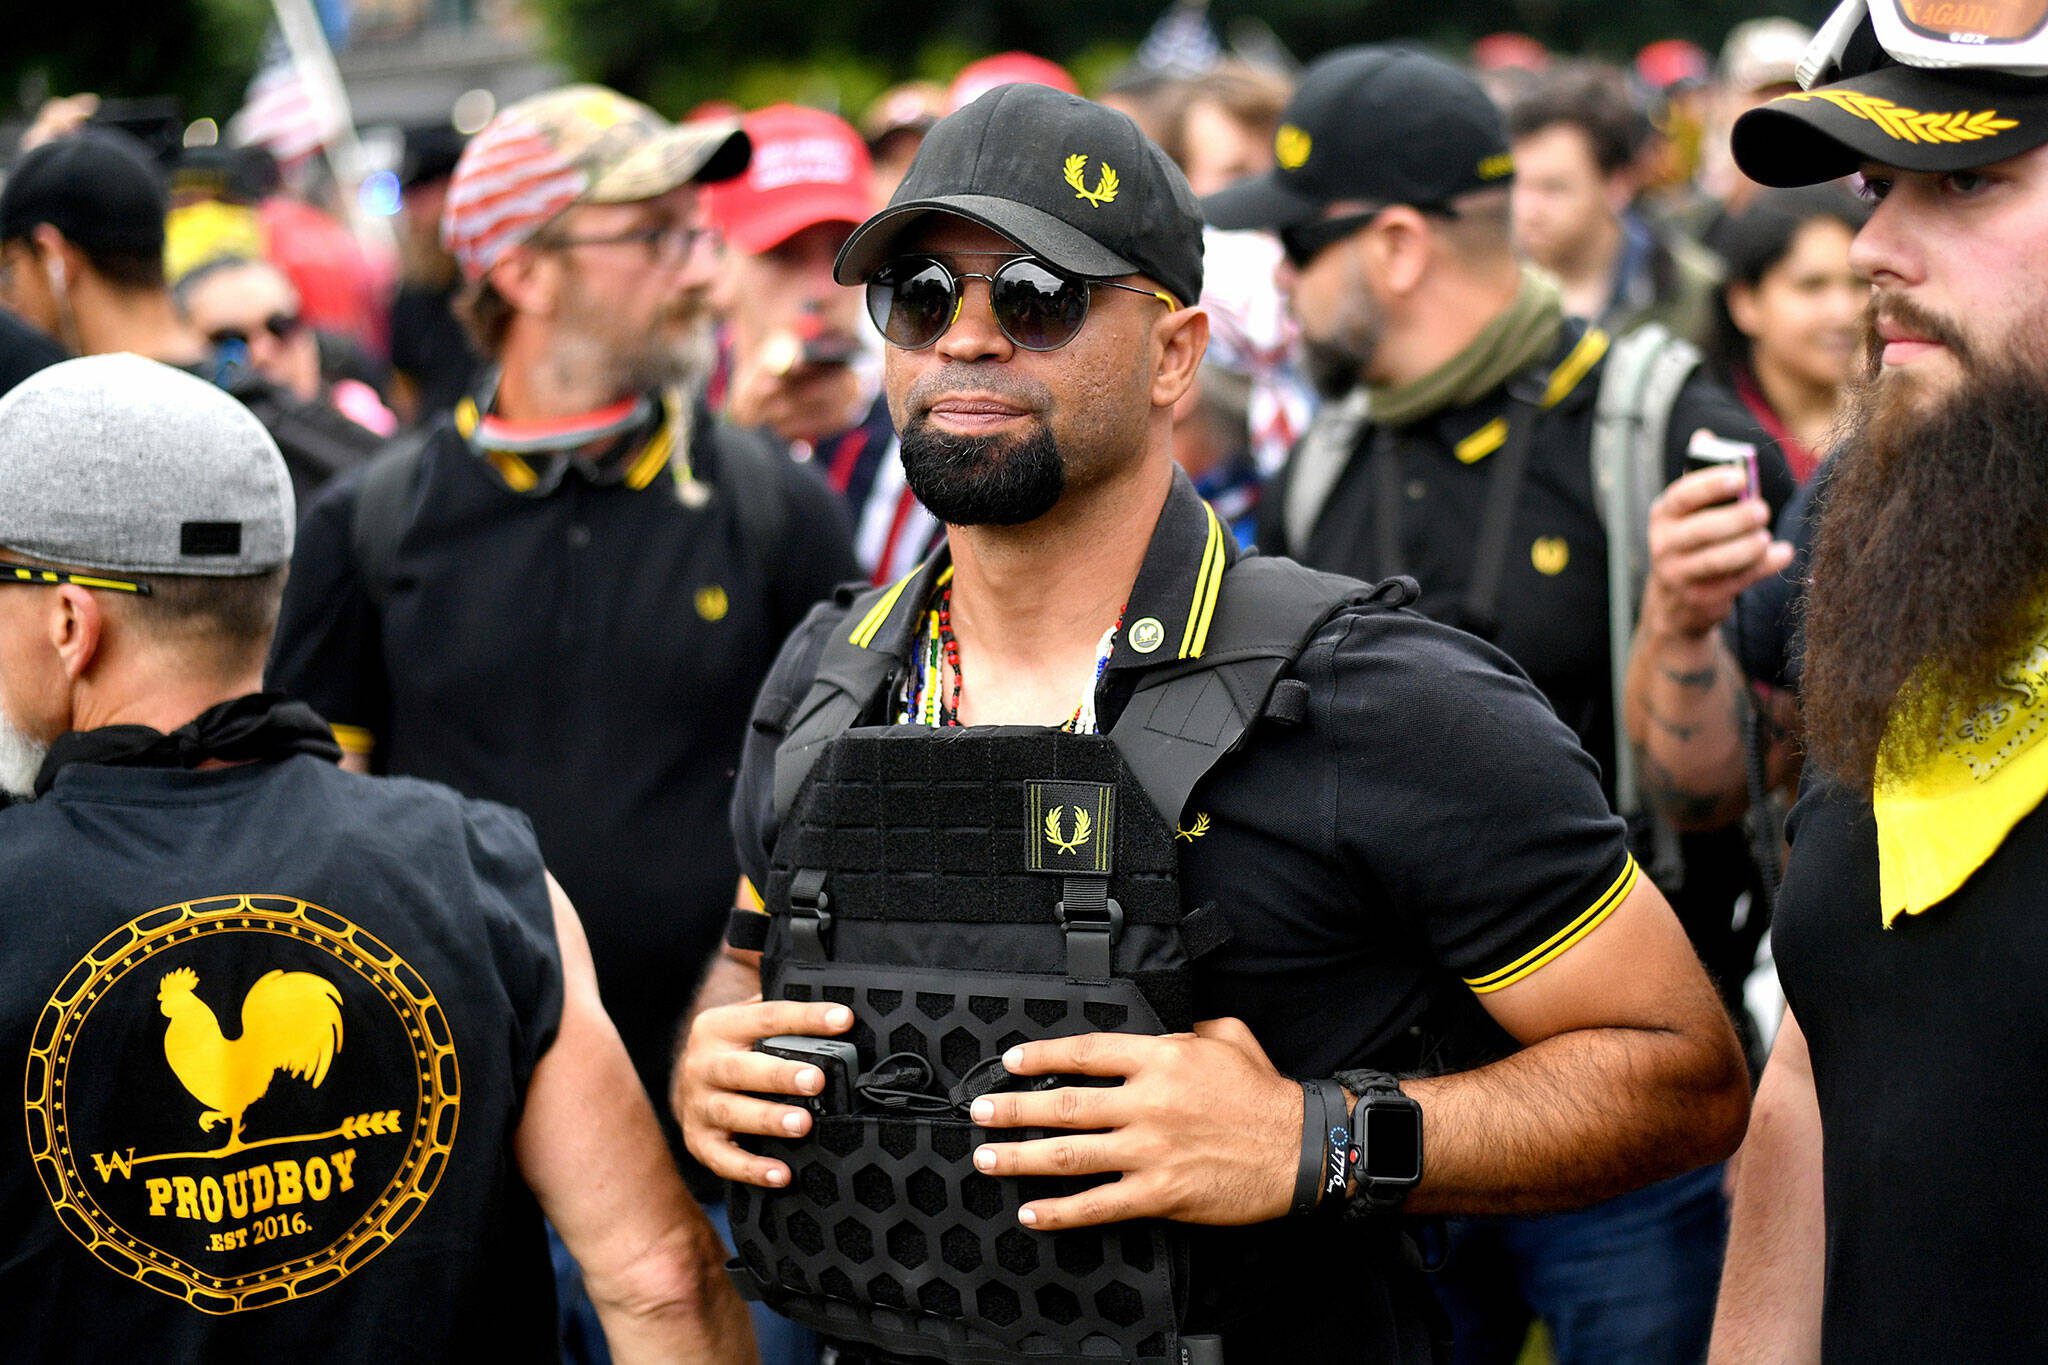 Proud Boys chairman Enrique Tarrio rallies in Portland, Ore., on Aug. 17, 2019. Tarrio and three other members of the far-right extremist group have been convicted of a plot to attack the U.S. Capitol in a desperate bid to keep Donald Trump in power after Trump lost the 2020 presidential election. (AP Photo/Noah Berger, File)